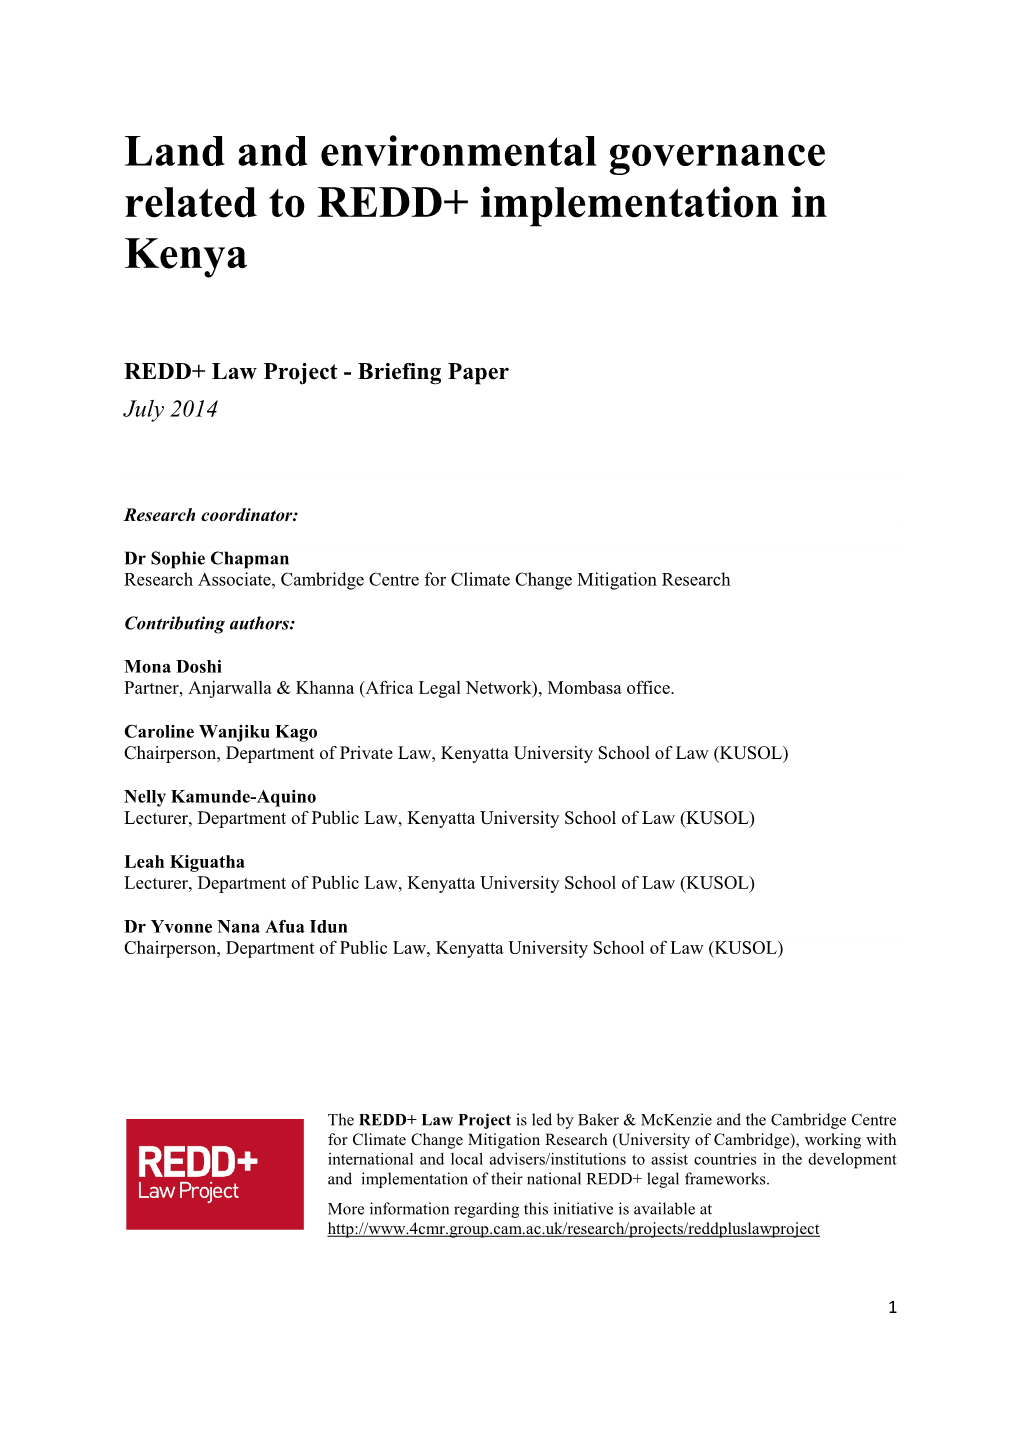 Land and Environmental Governance Related to REDD+ Implementation in Kenya